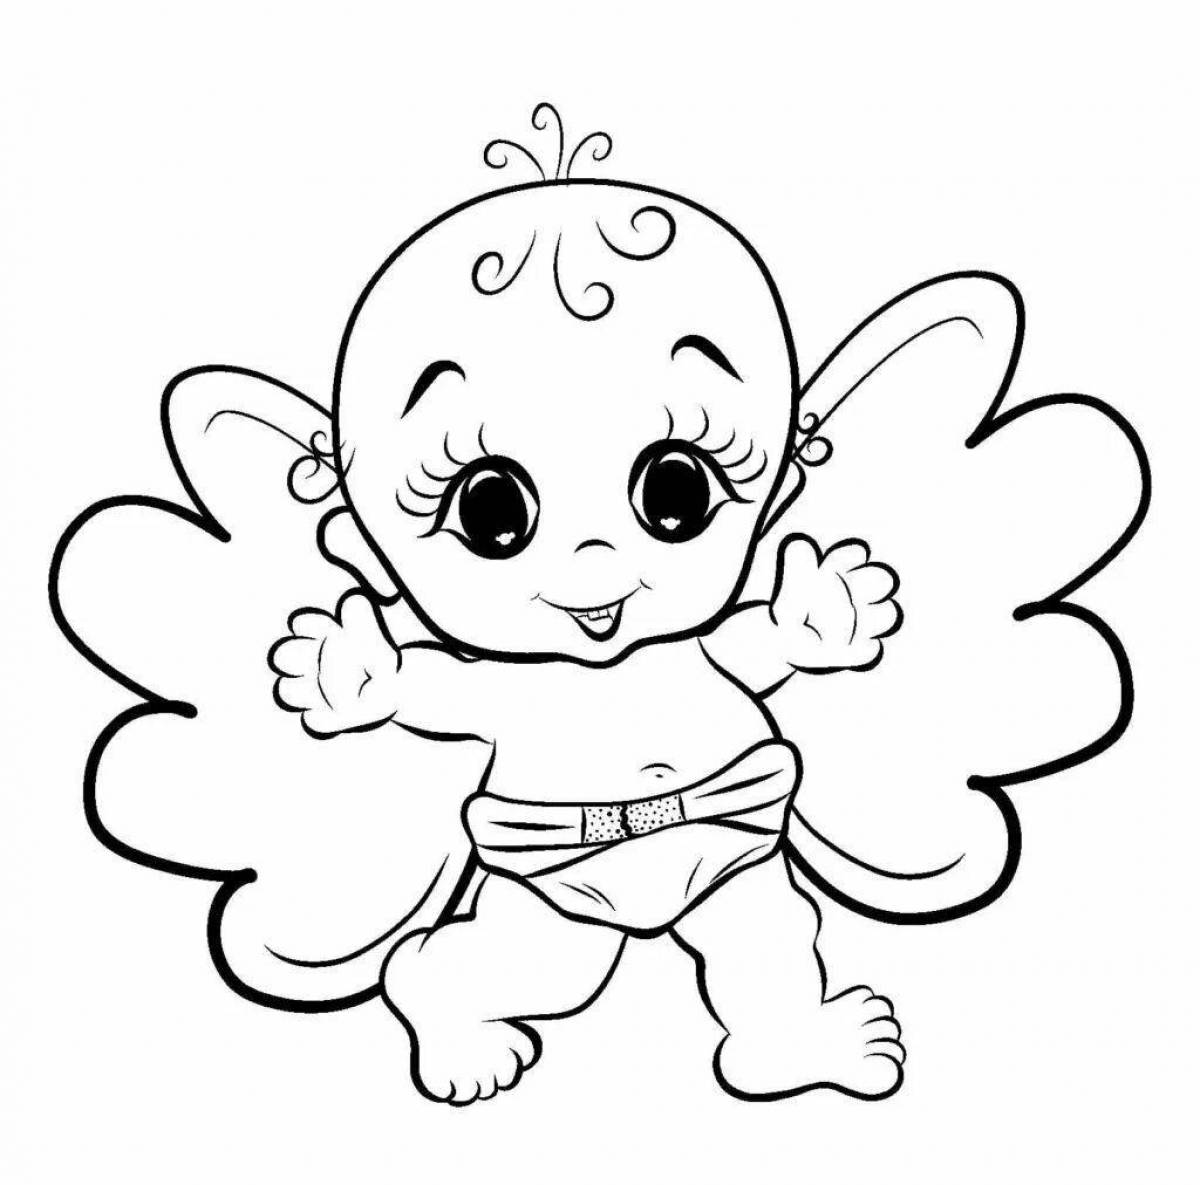 Shine baby angel coloring book